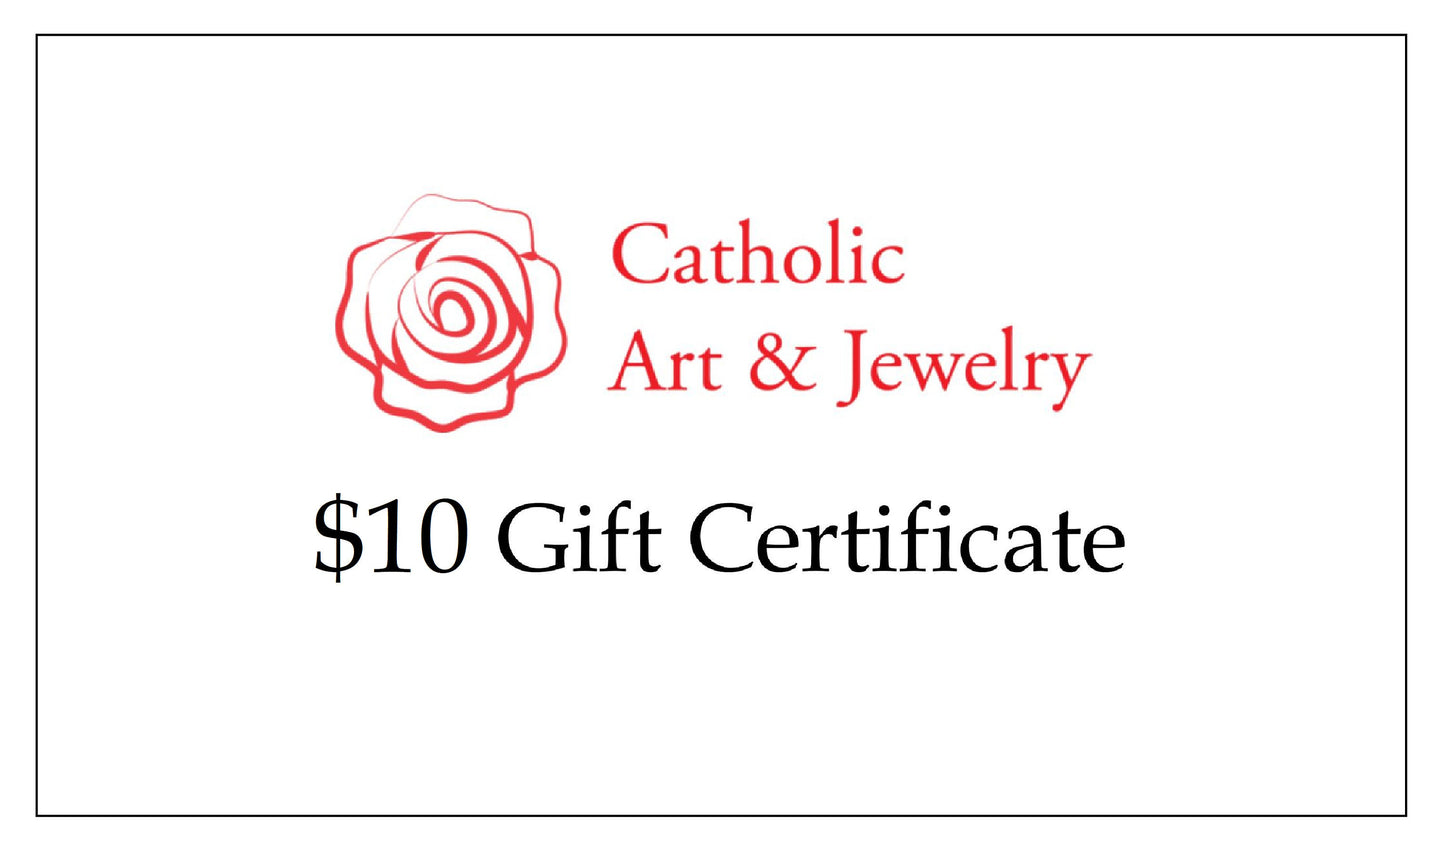 10 Dollar Gift Certificate Only Redeemable in our shop, ClassicCatholic